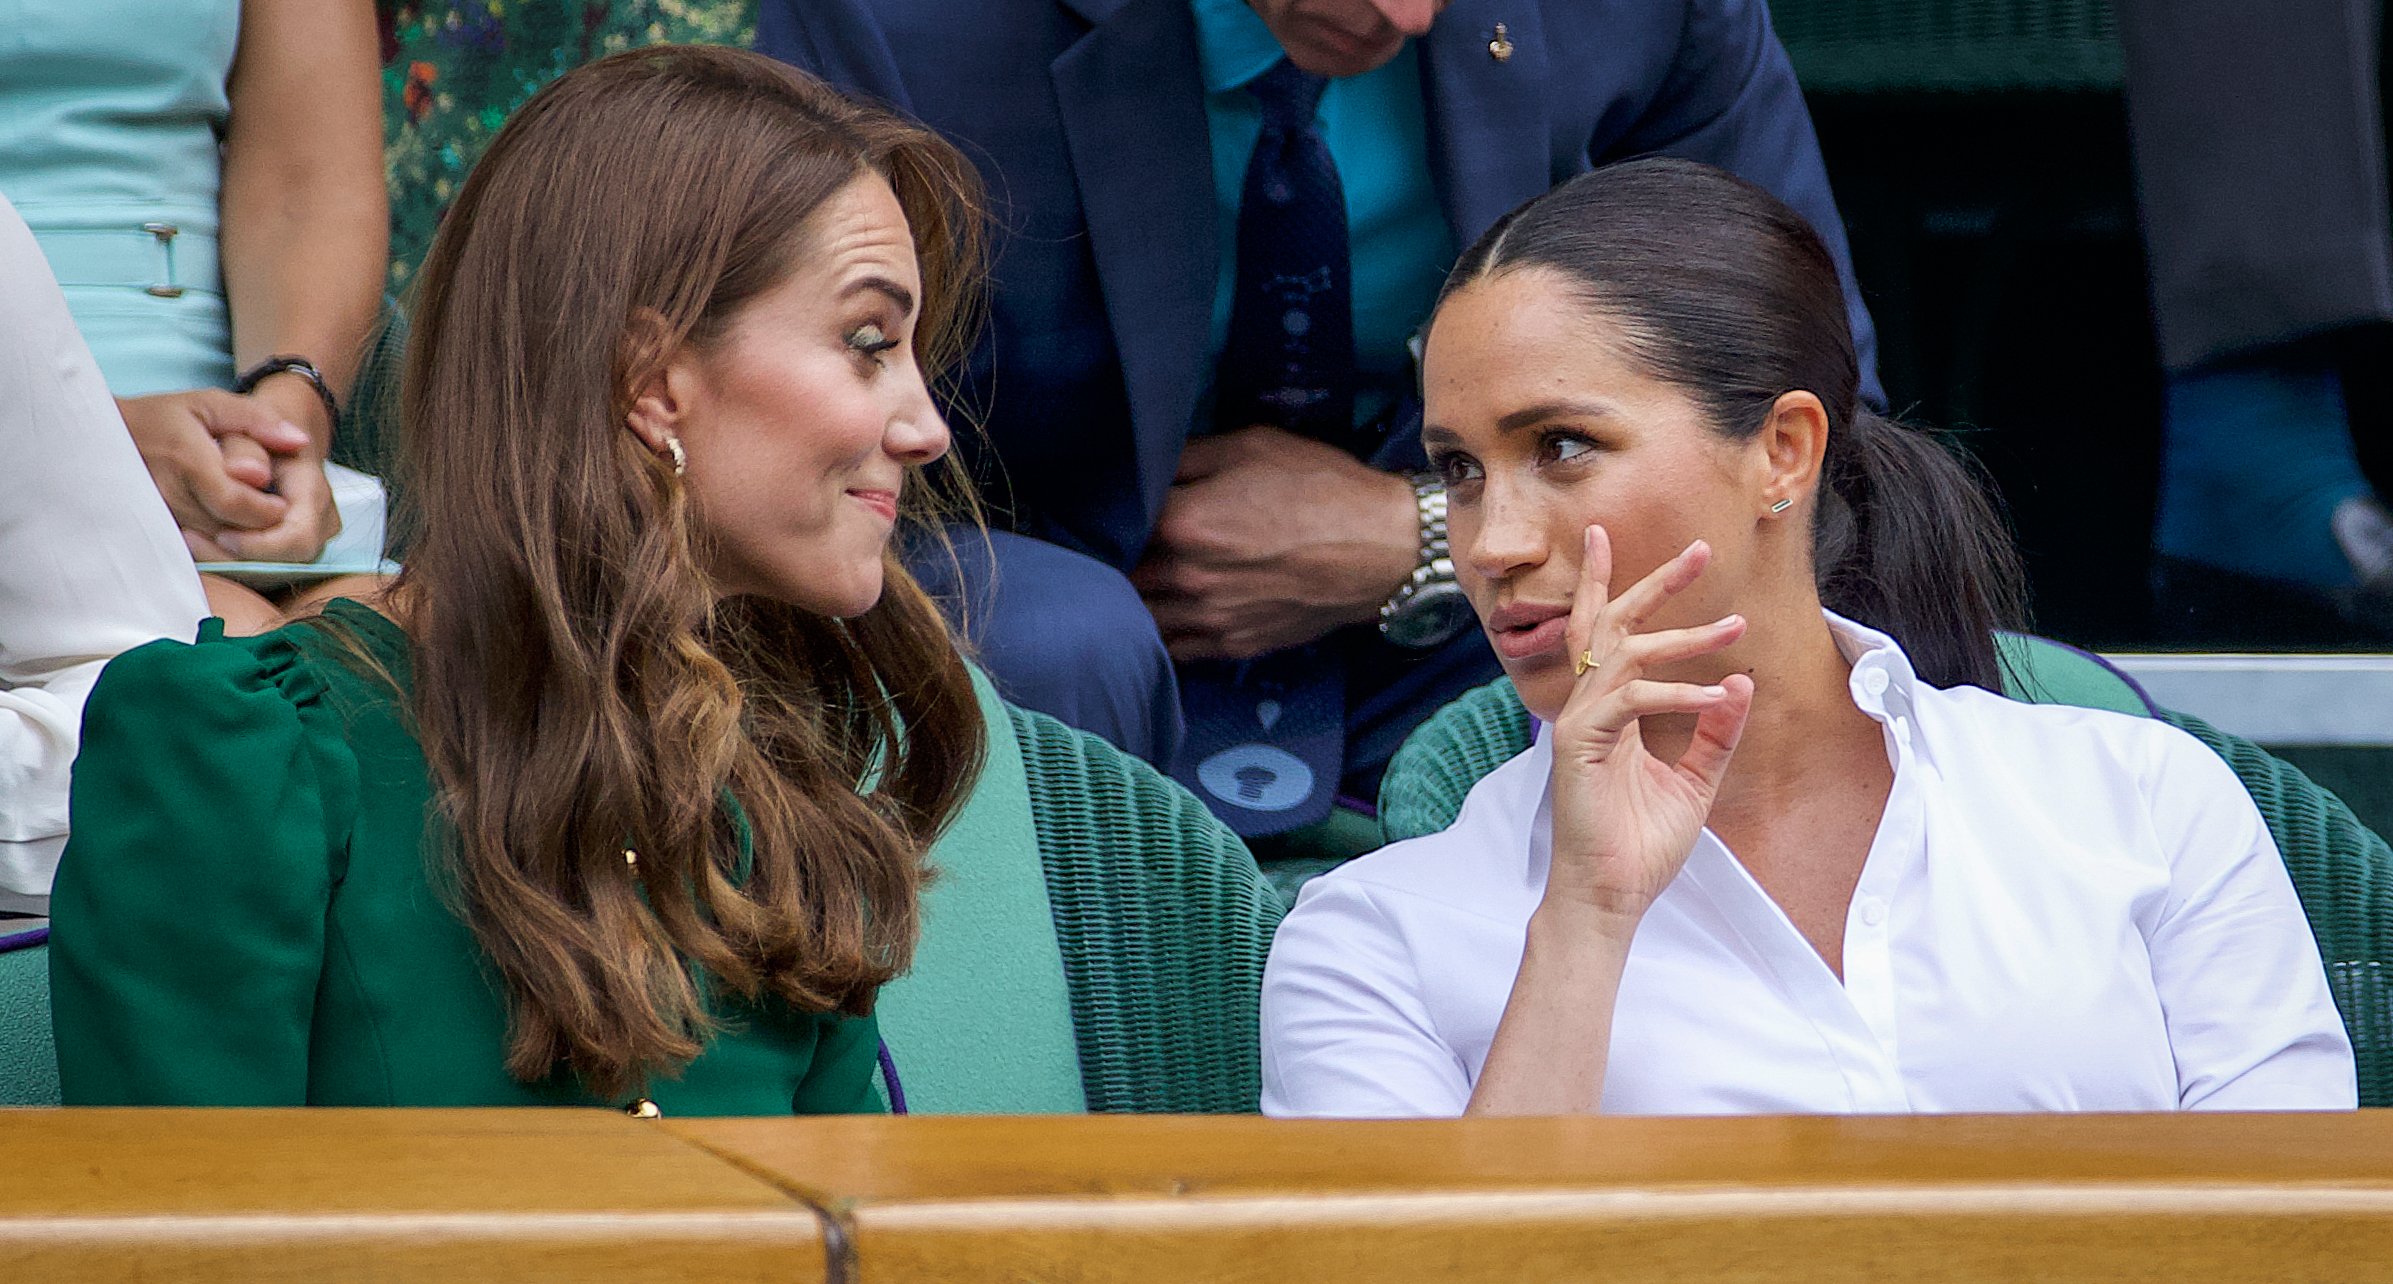 Kate Middleton conversing with Meghan Markle in the Royal Box on Centre Court during the Wimbledon Lawn Tennis Championships at the All England Lawn Tennis and Croquet Club at Wimbledon on July 13, 2019 in London, England. / Source: Getty Images